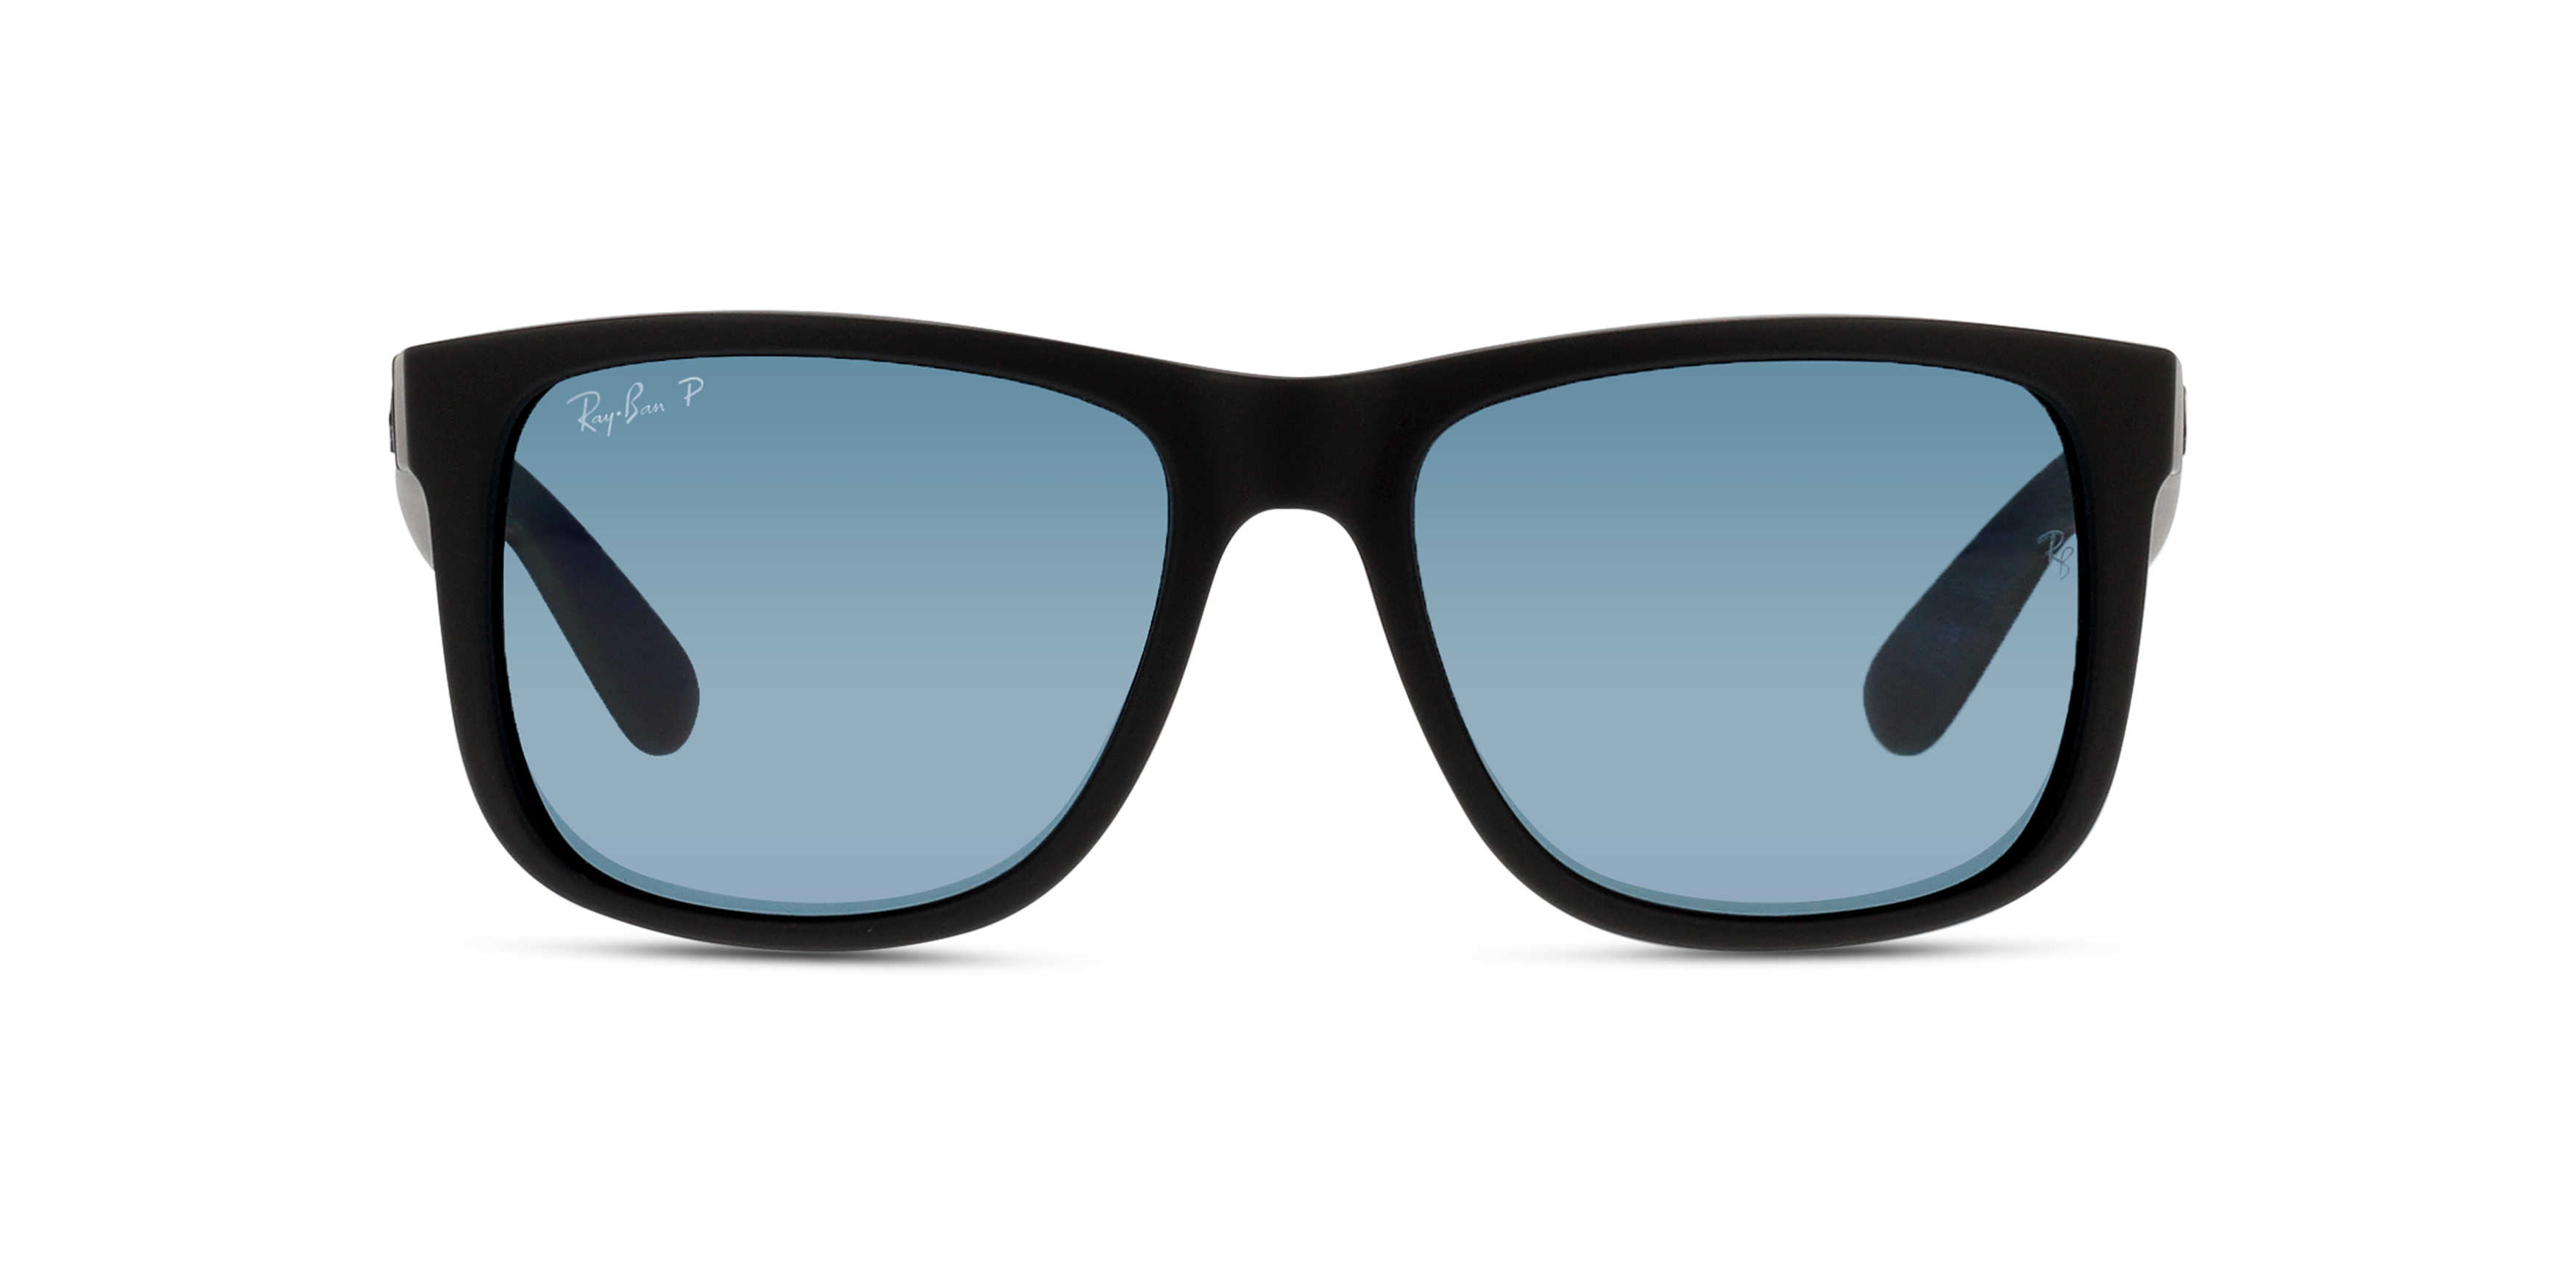 [products.image.front] Ray-Ban Justin Classic RB4165 622/2V